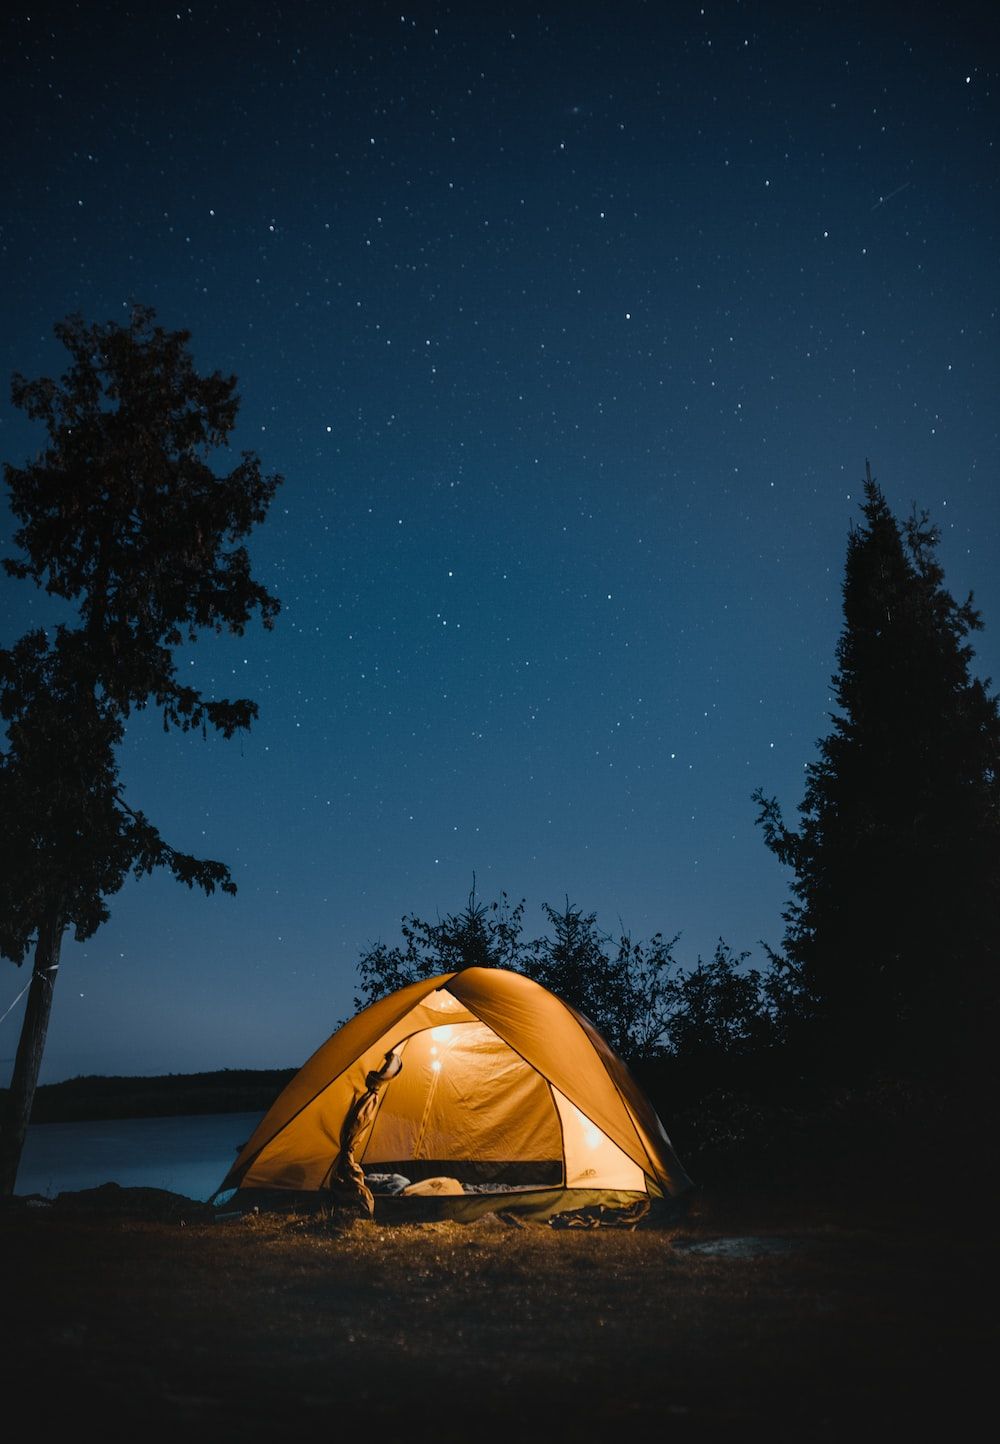 Beach Camping Picture. Download Free Image